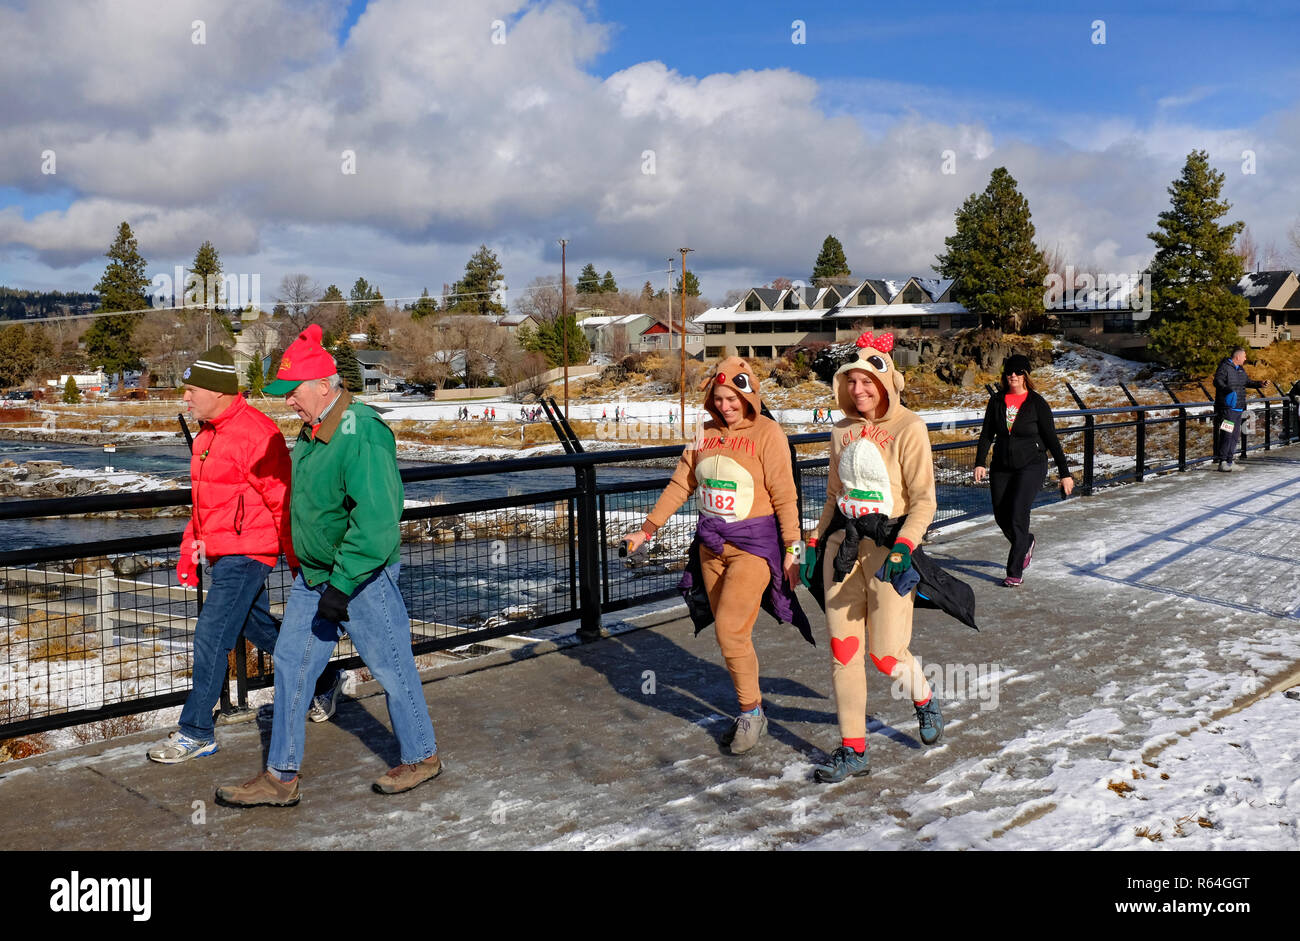 Runners and walkers in costume take part in an annual charity event that supports the Arthritis Foundation called the Jingle Bell Run, held in Bend, O Stock Photo